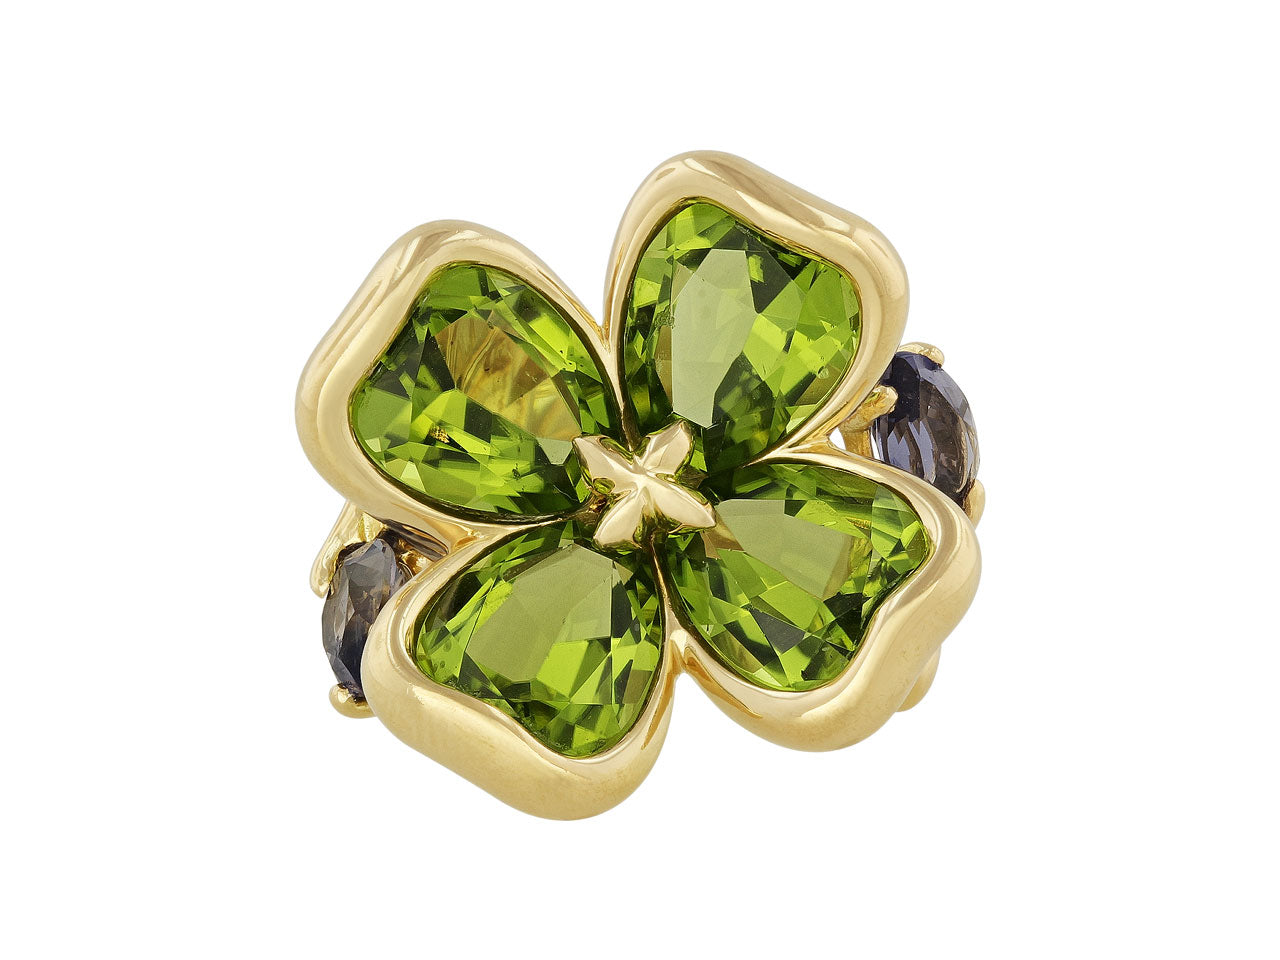 Chanel Peridot and Iolite Clover Flower Ring in 18K